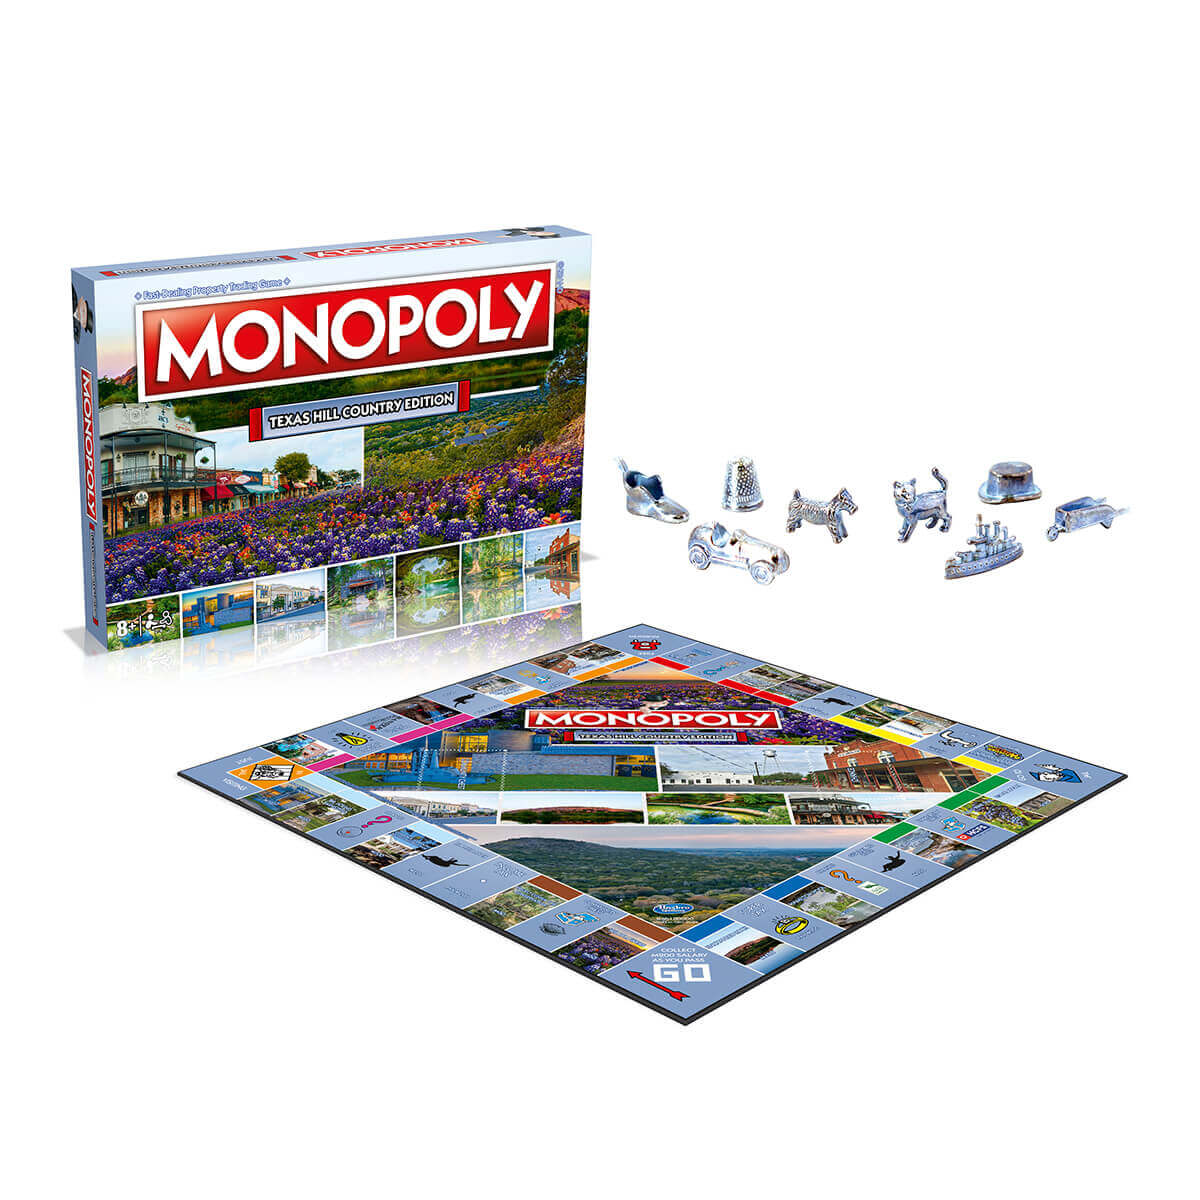 Texas Hill Country Monopoly Board Game